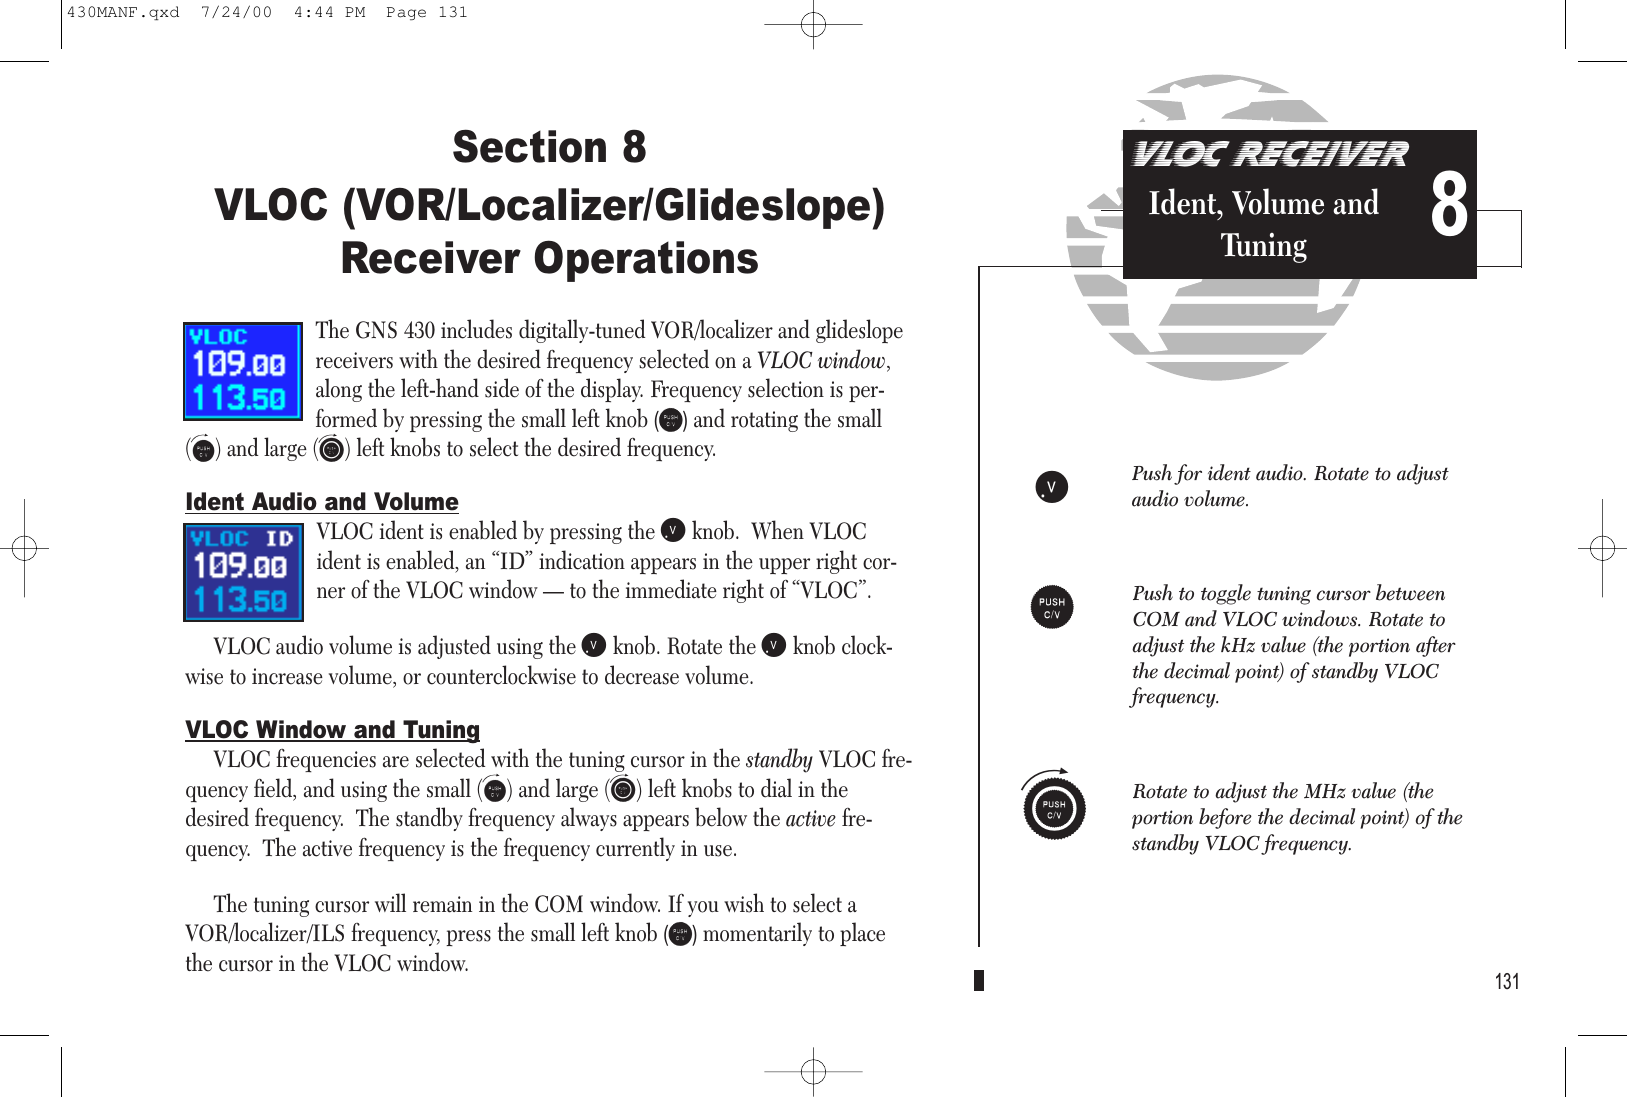 Section 8VLOC (VOR/Localizer/Glideslope)Receiver OperationsThe GNS 430 includes digitally-tuned VOR/localizer and glideslopereceivers with the desired frequency selected on a VLOC window,along the left-hand side of the display. Frequency selection is per-formed by pressing the small left knob (v)and rotating the small(f) and large (h) left knobs to select the desired frequency. Ident Audio and VolumeVLOC ident is enabled by pressing the jknob.  When VLOCident is enabled, an “ID” indication appears in the upper right cor-ner of the VLOC window — to the immediate right of “VLOC”.VLOC audio volume is adjusted using the jknob. Rotate the jknob clock-wise to increase volume, or counterclockwise to decrease volume. VLOC Window and TuningVLOC frequencies are selected with the tuning cursor in the standby VLOC fre-quency field, and using the small (f) and large (h) left knobs to dial in thedesired frequency.  The standby frequency always appears below the active fre-quency.  The active frequency is the frequency currently in use.The tuning cursor will remain in the COM window. If you wish to select aVOR/localizer/ILS frequency, press the small left knob (v)momentarily to placethe cursor in the VLOC window. 131VLOC RECEIVERIdent, Volume andTuning 8jPush for ident audio. Rotate to adjustaudio volume.vRotate to adjust the MHz value (theportion before the decimal point) of thestandby VLOC frequency.Push to toggle tuning cursor betweenCOM and VLOC windows. Rotate toadjust the kHz value (the portion afterthe decimal point) of standby VLOC frequency.h430MANF.qxd  7/24/00  4:44 PM  Page 131